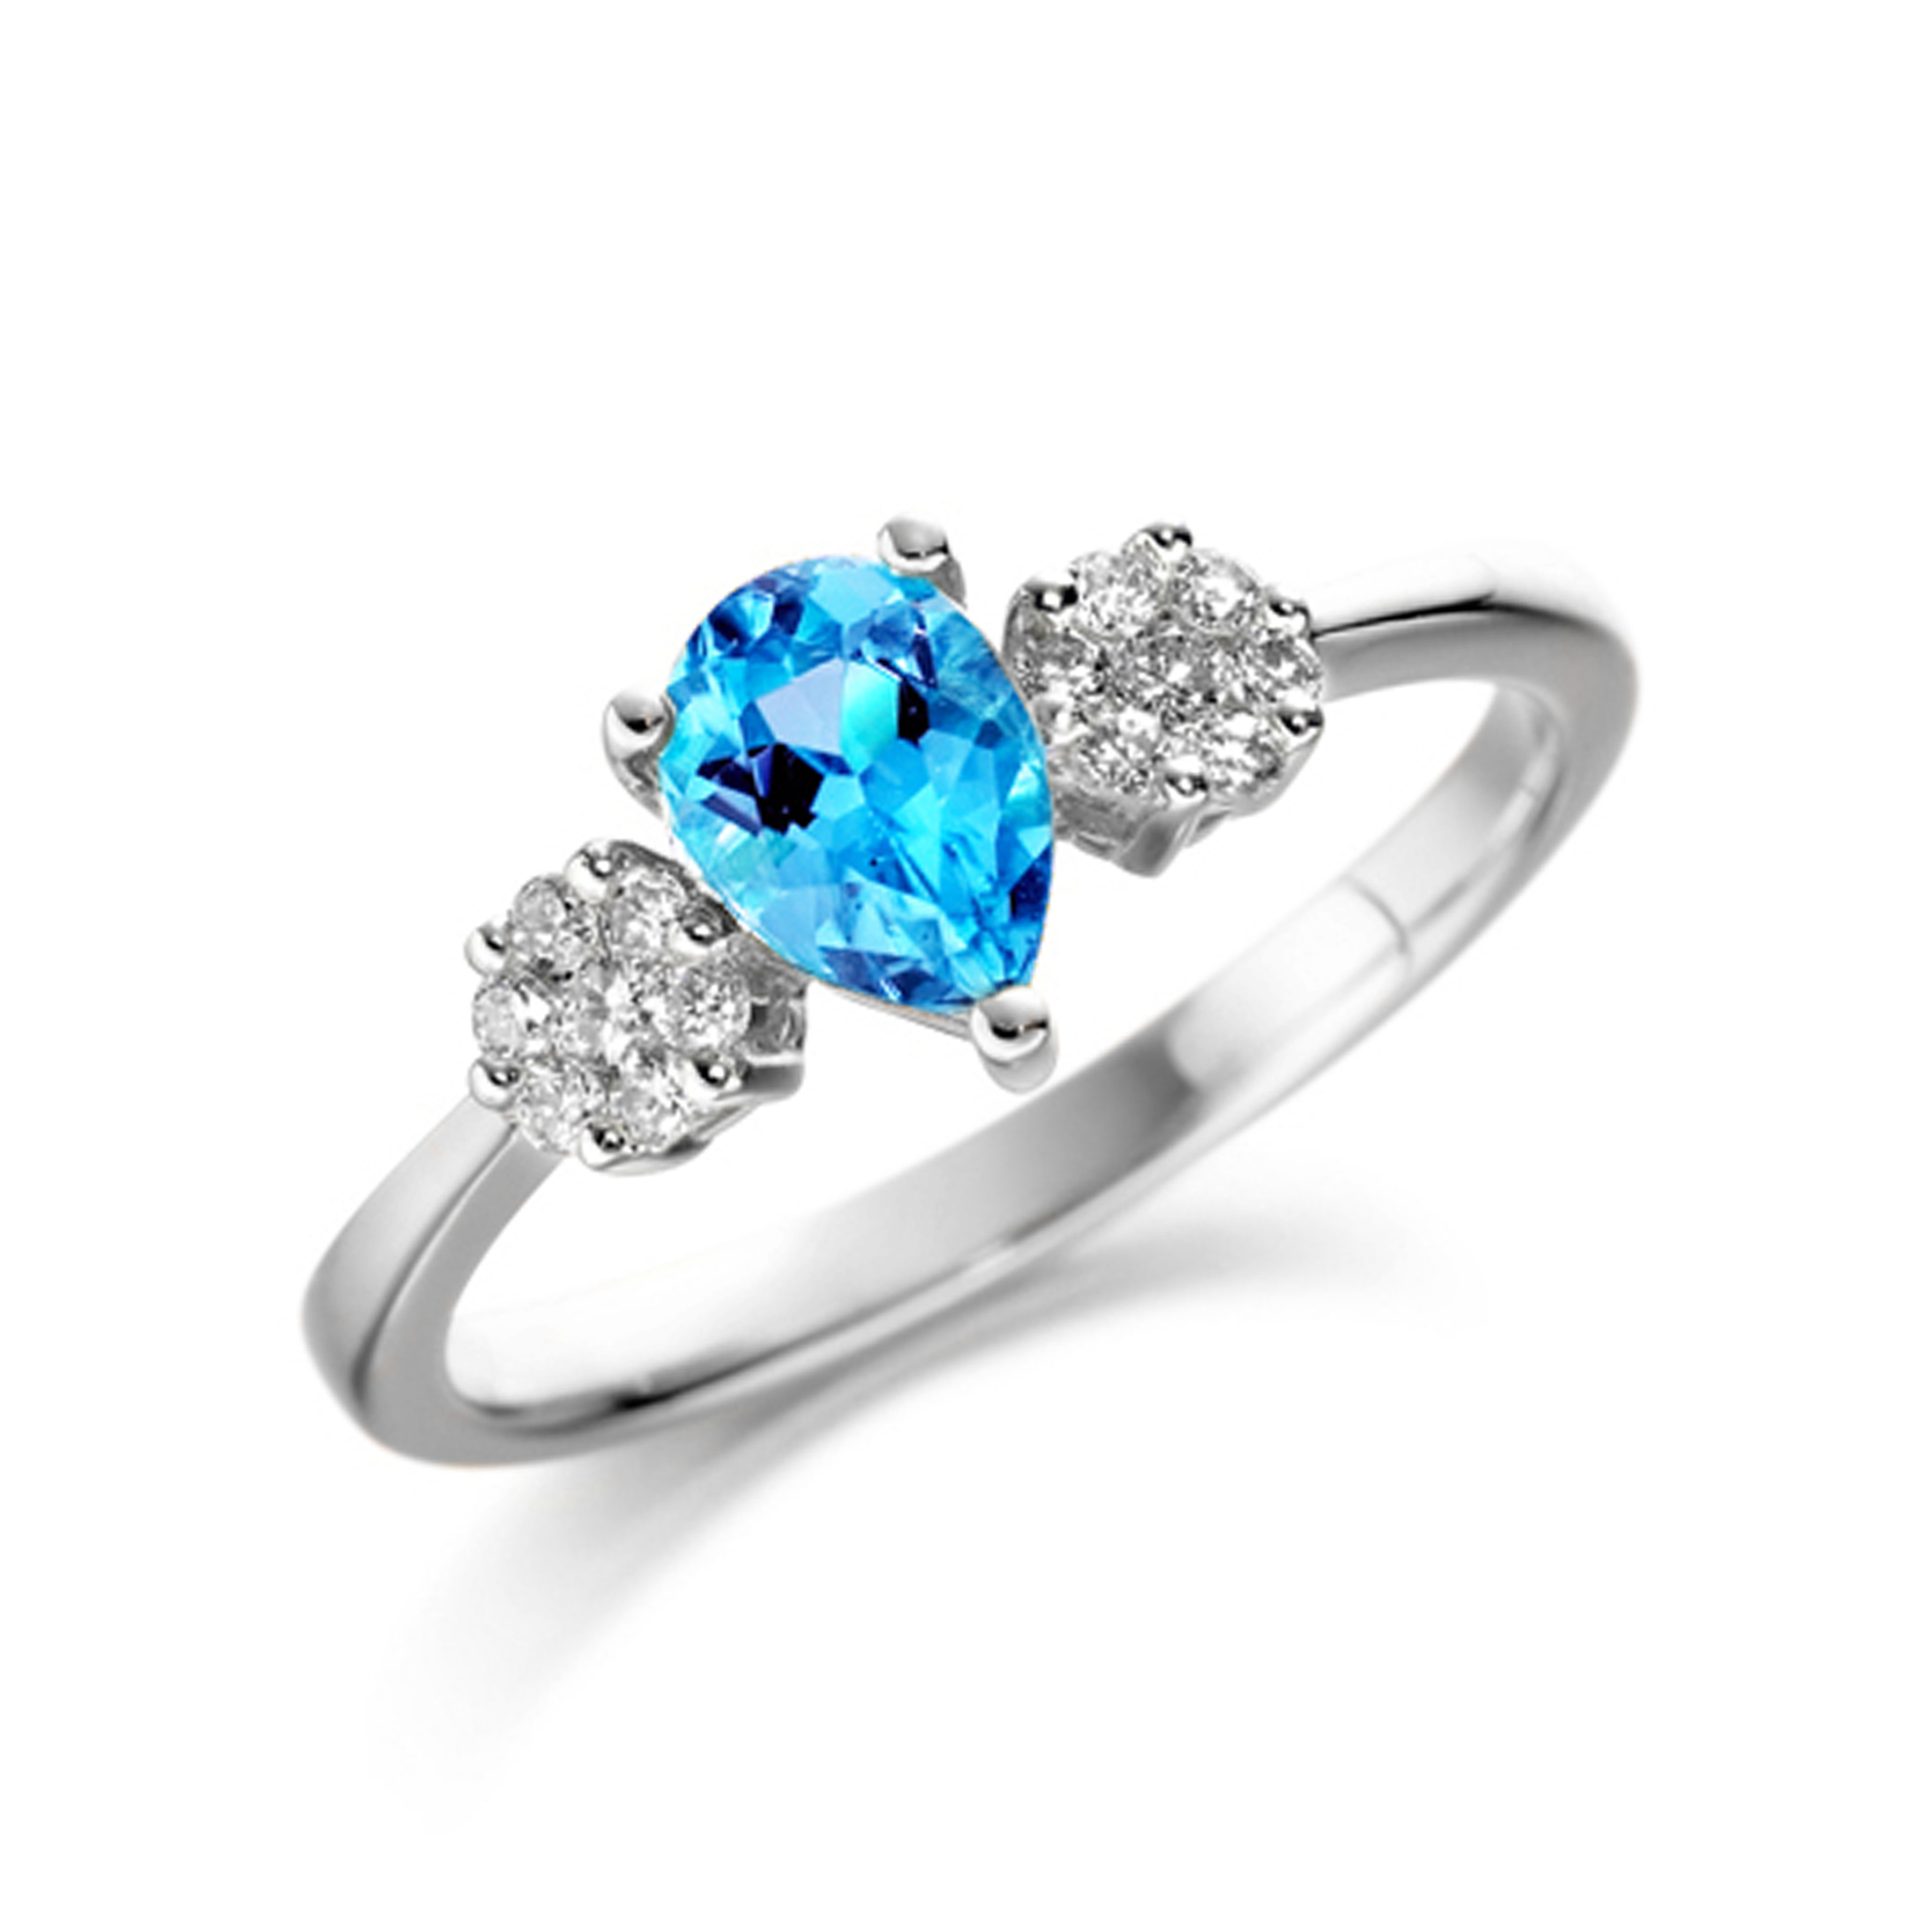 6X4mm Pear Blue Topaz Stones On Shoulder Diamond And Gemstone Engagement Ring